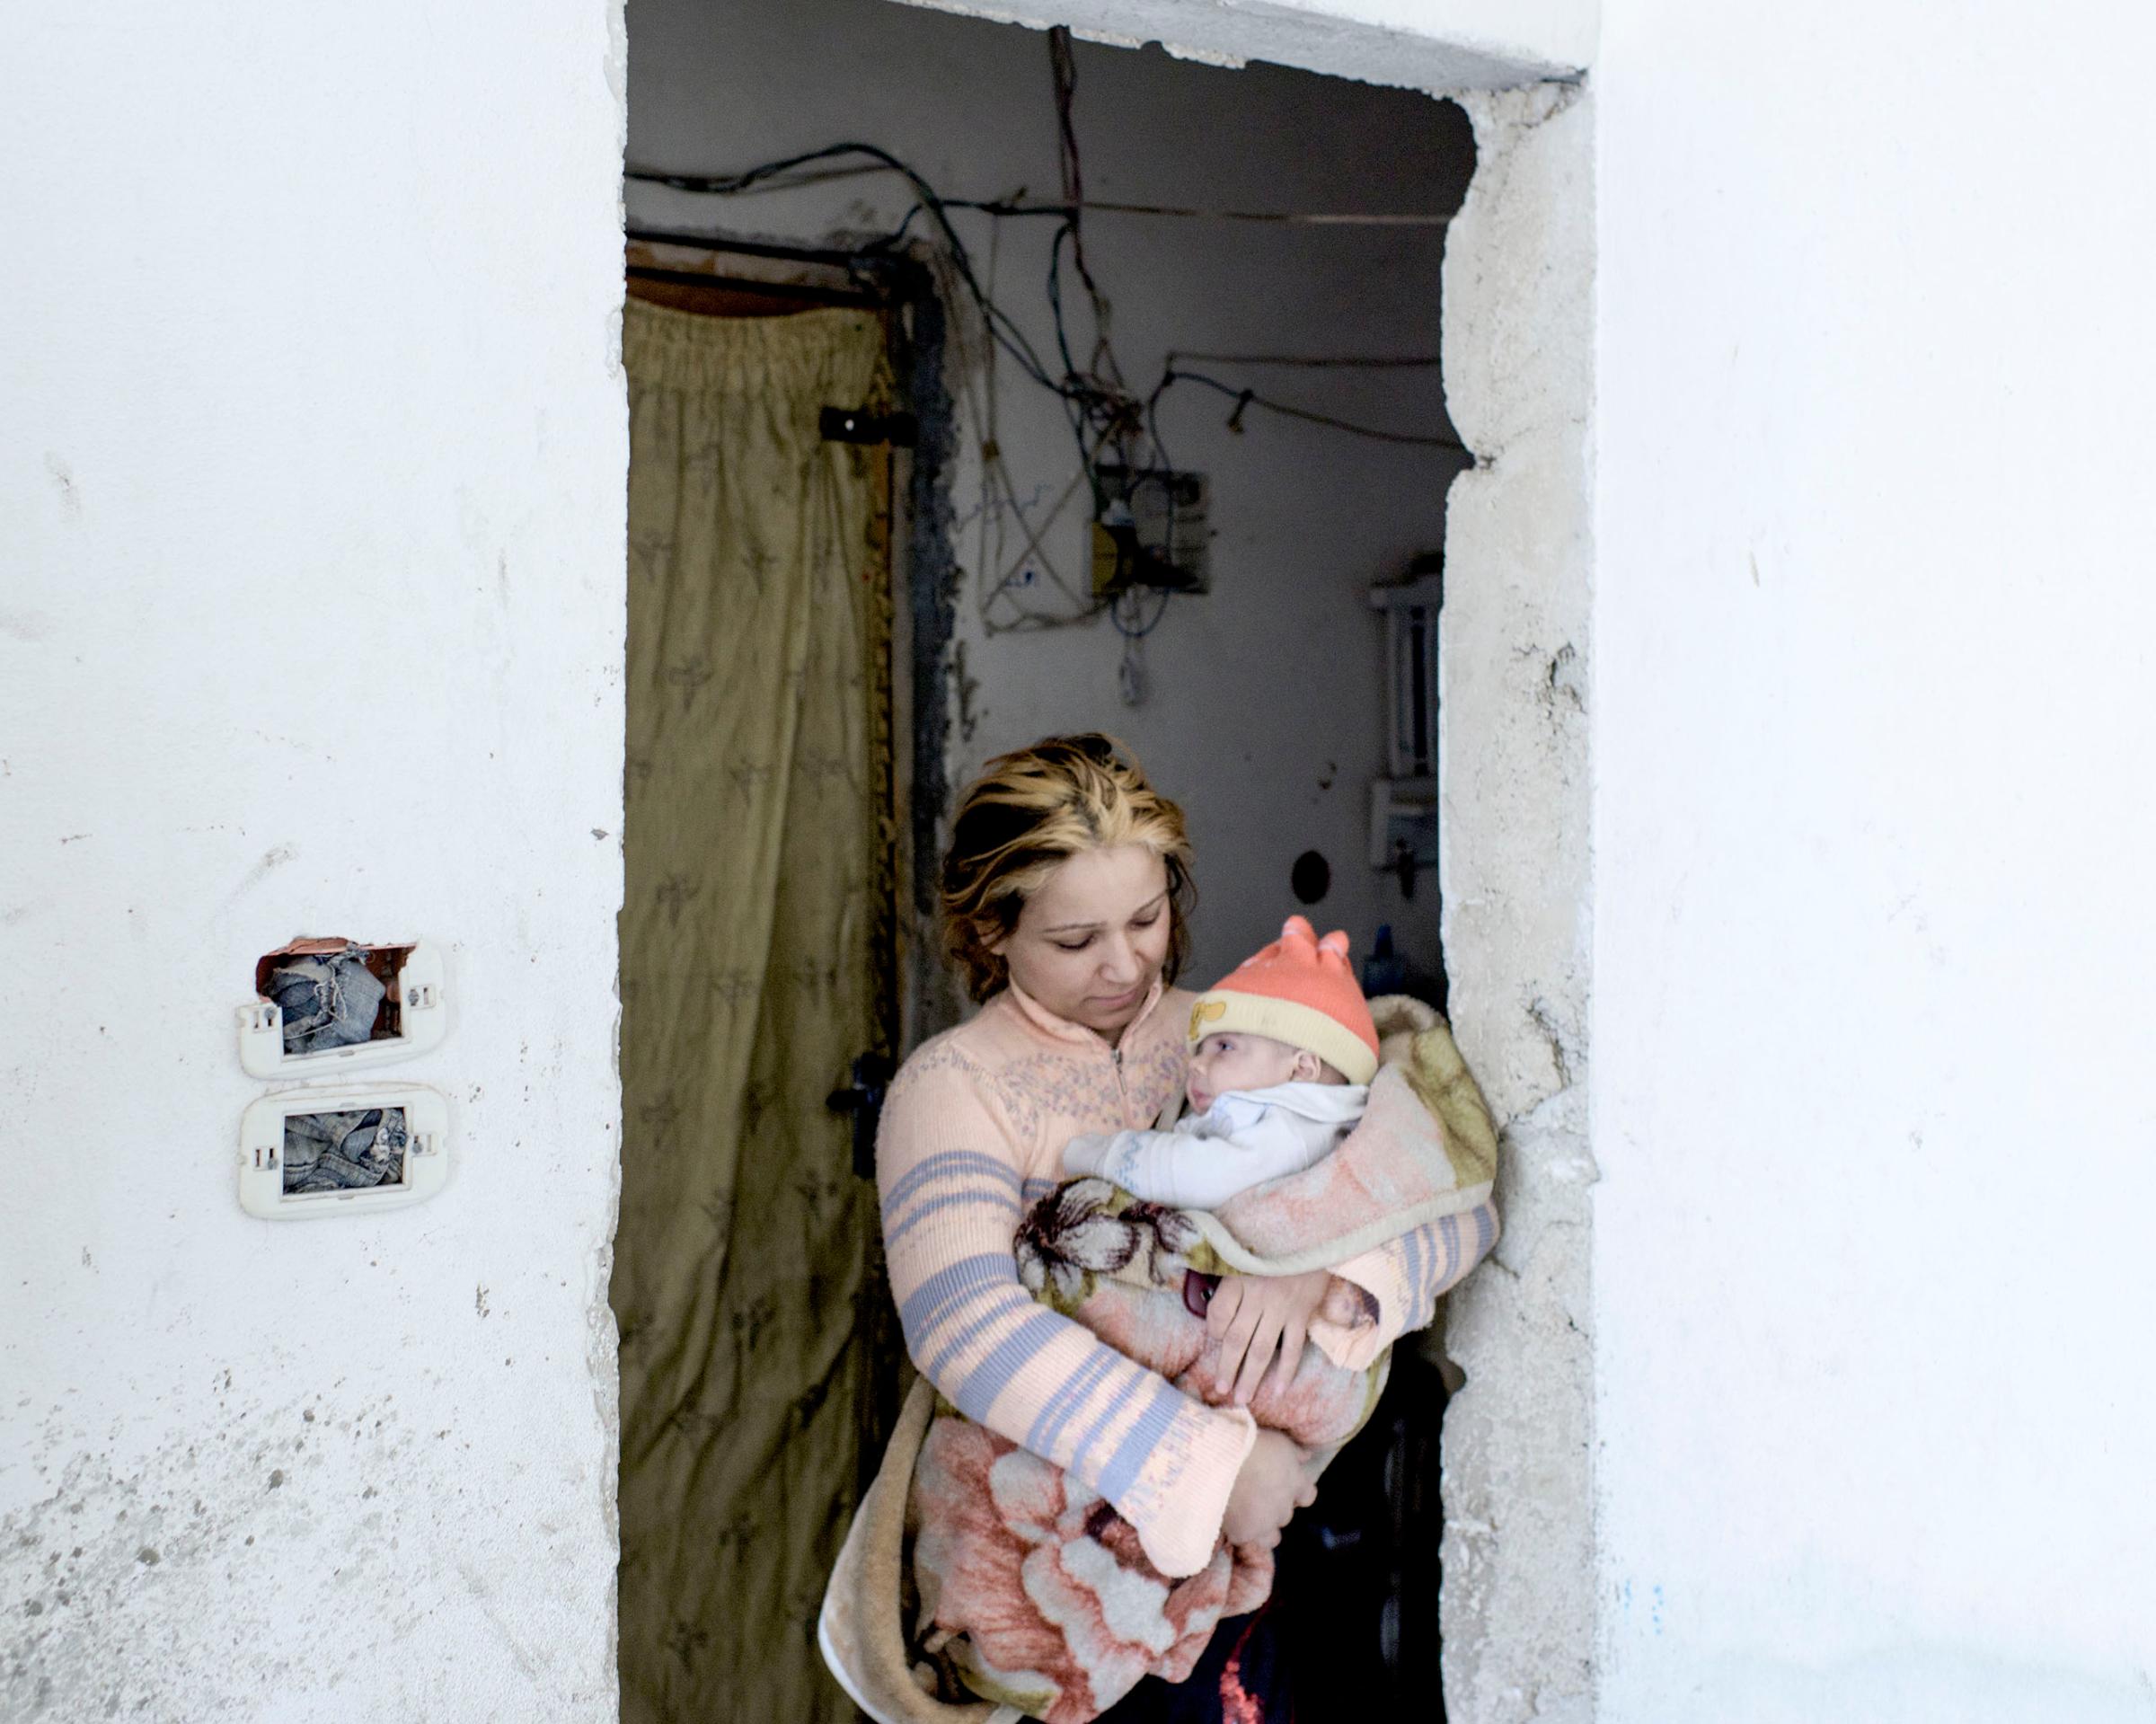 An internally displaced woman holds her baby in the building where they now live in the Salaheddin district of Aleppo, Syria, March 2016.